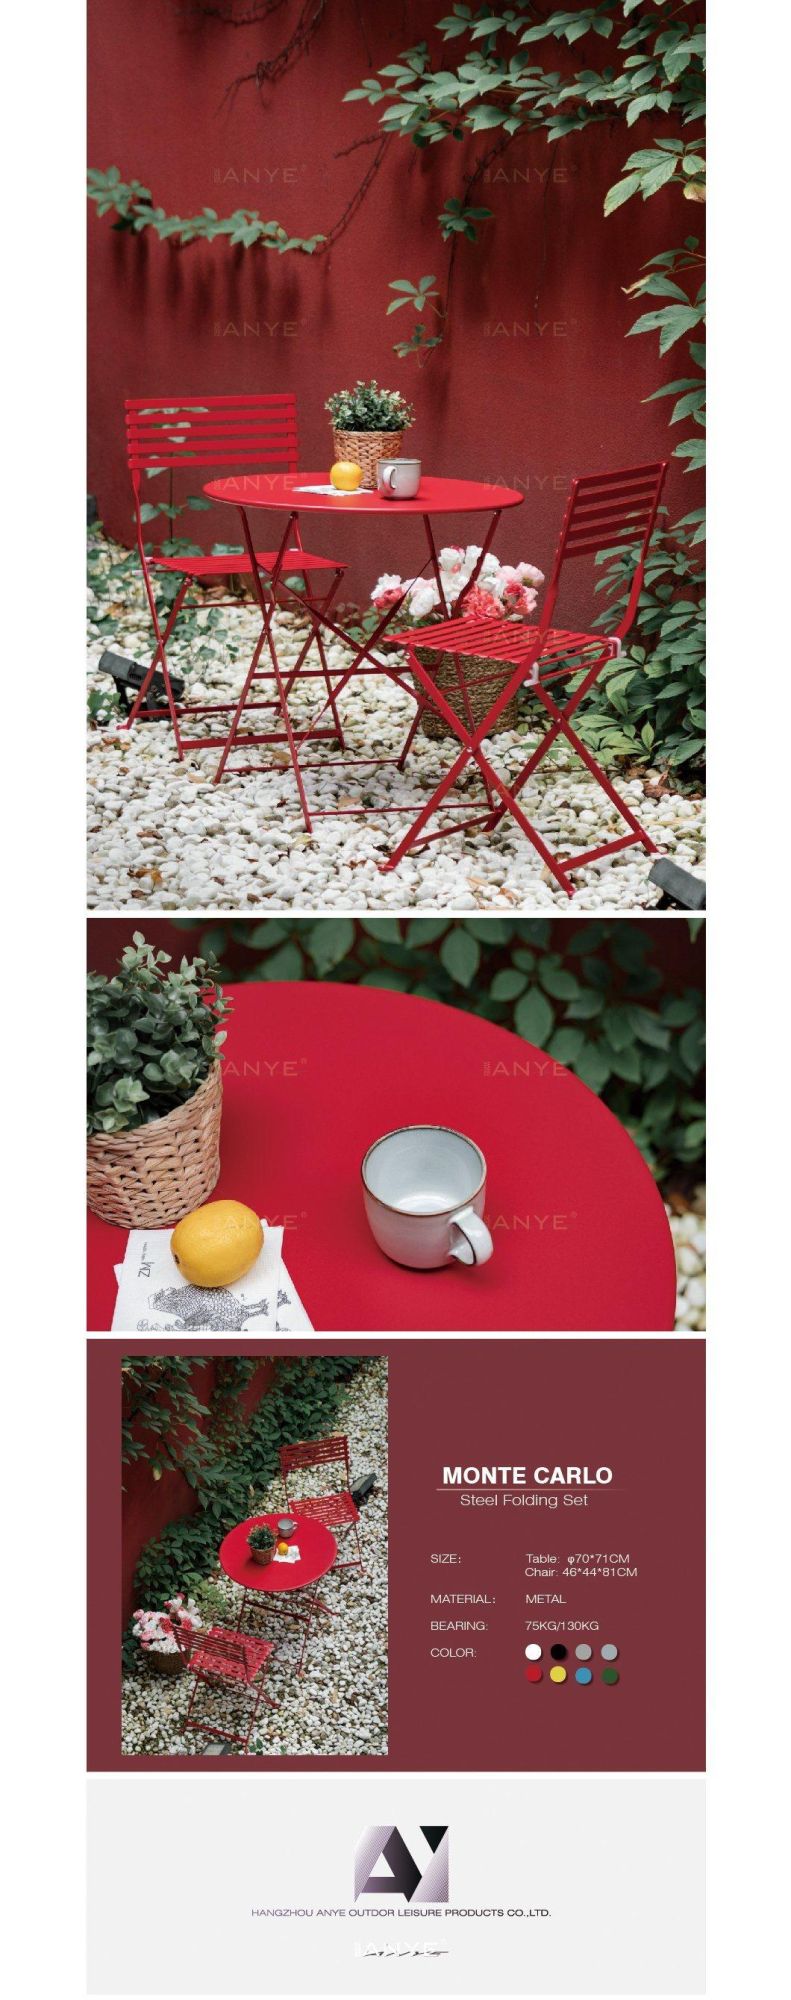 Balcony Furniture Rust Resistant Foldable Dining Table and Chair Modern Casual Furniture for Outdoor